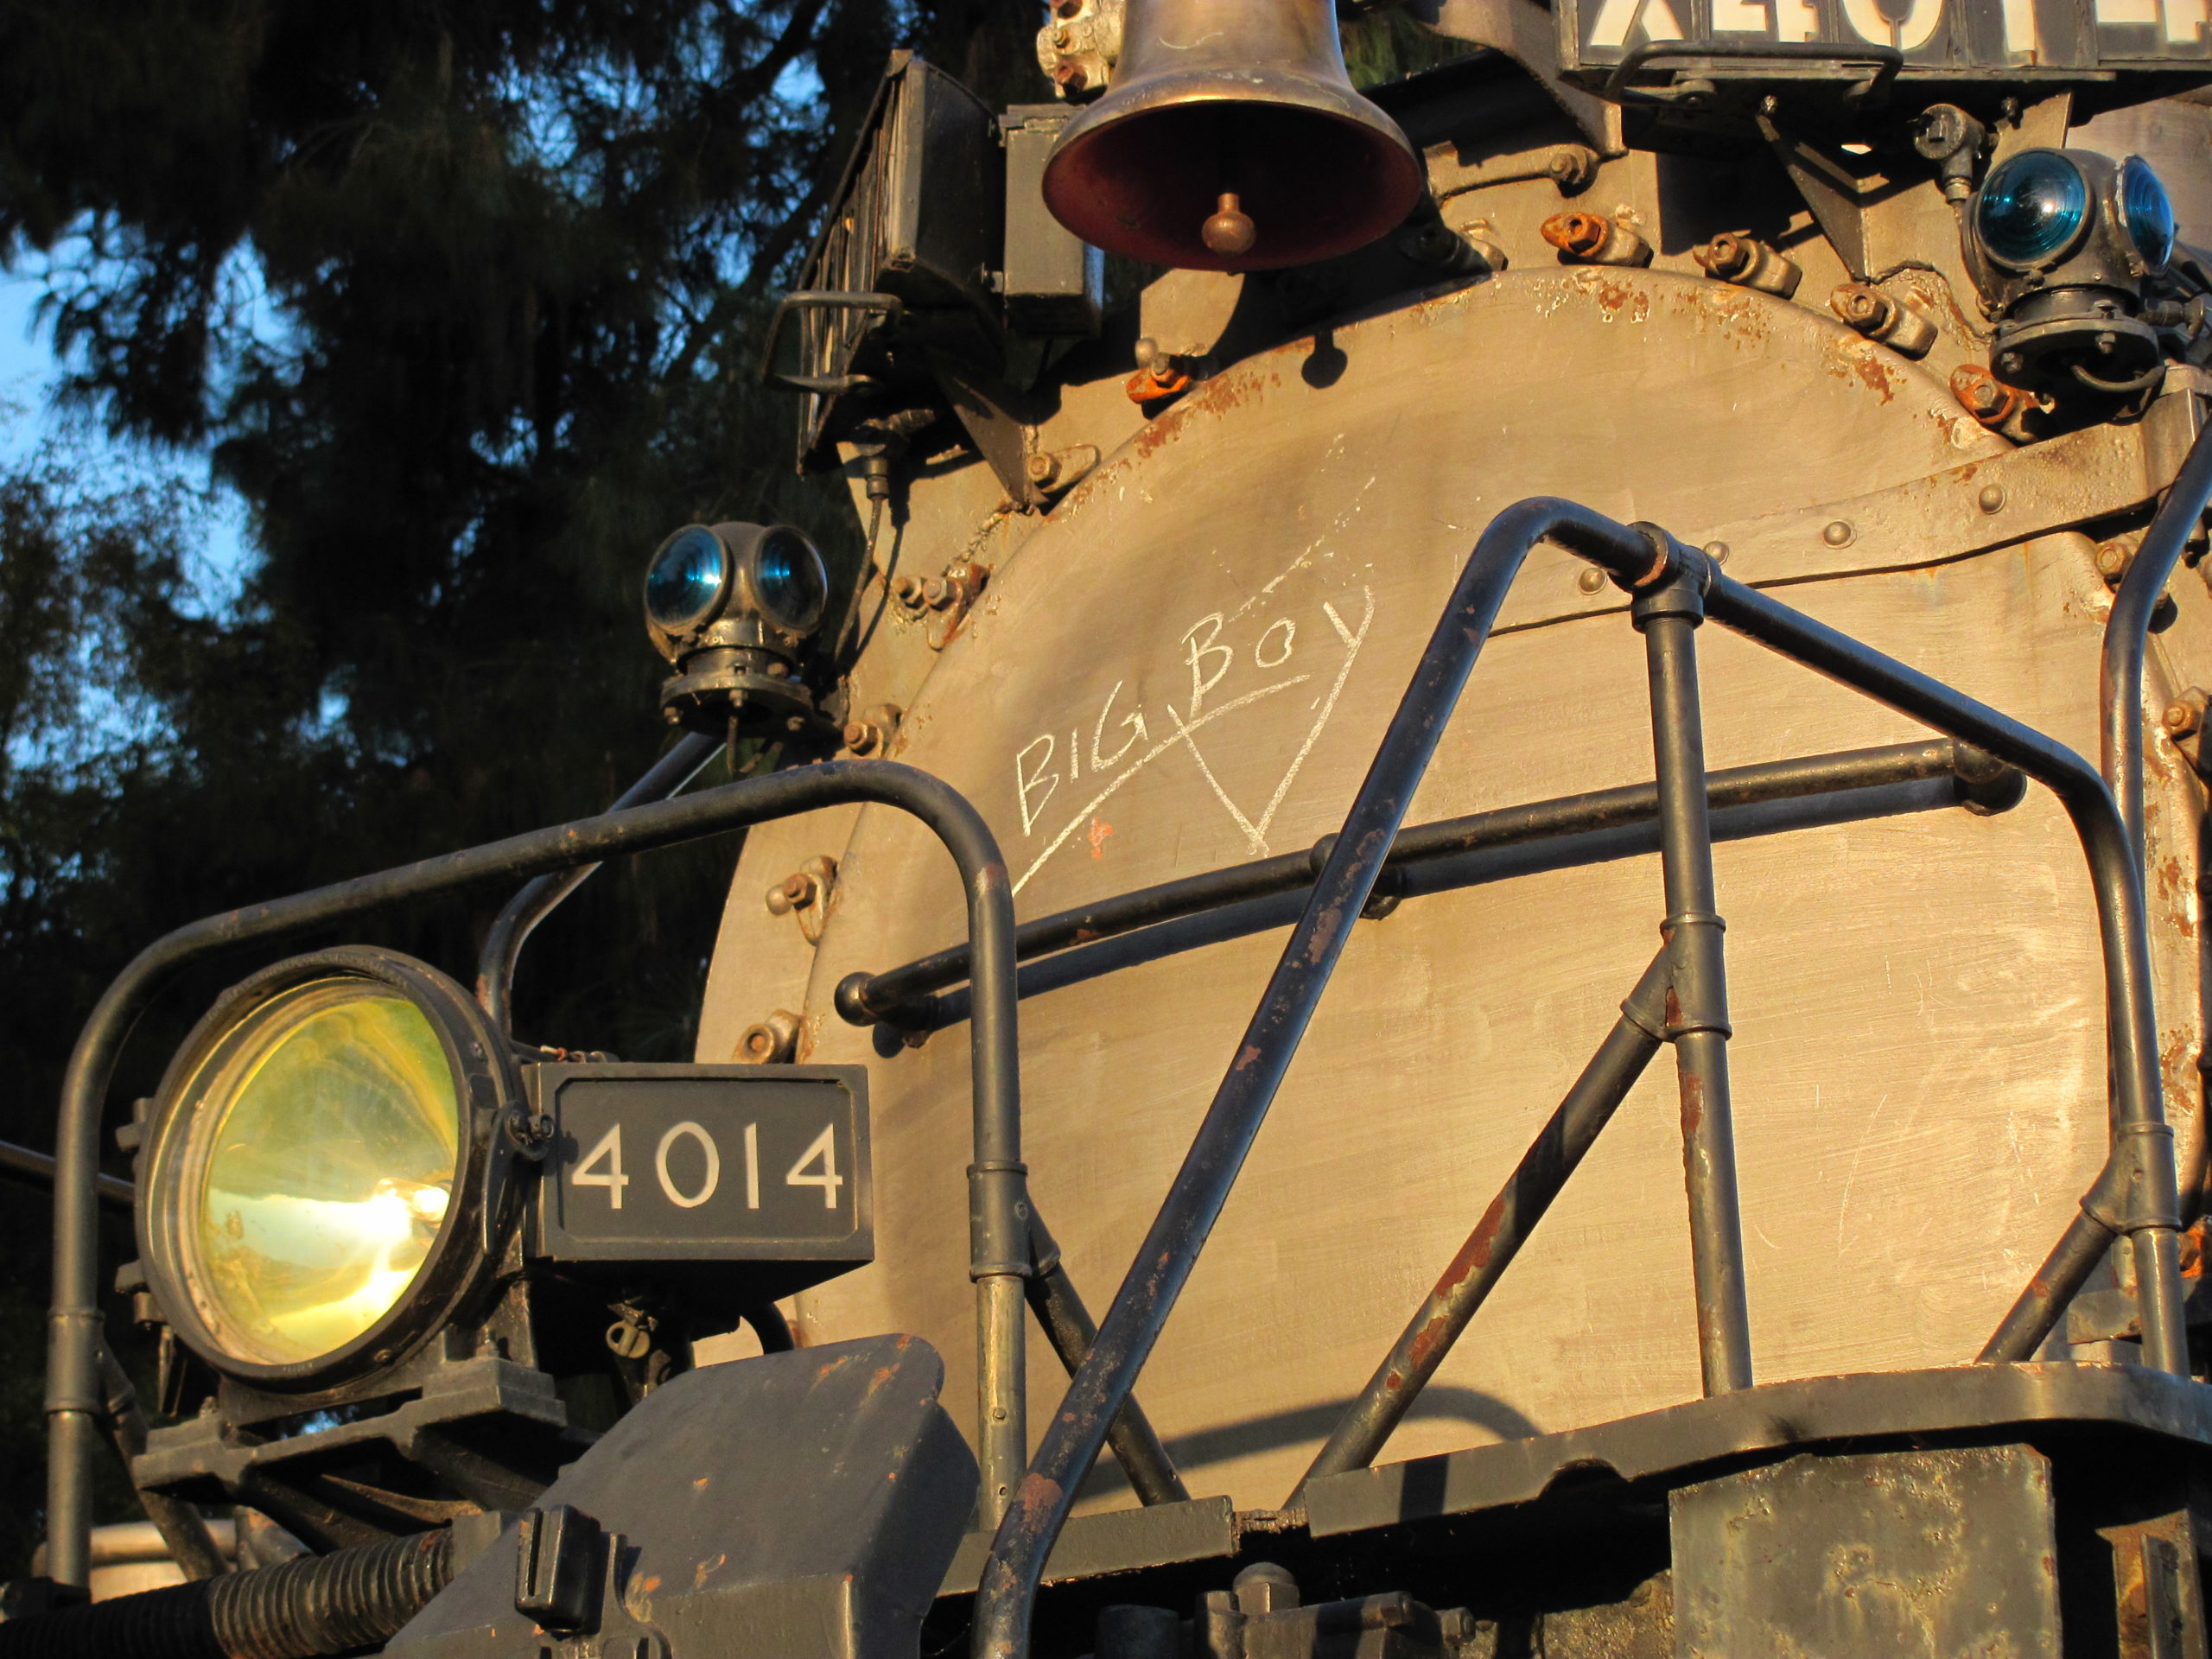 MidFebruary for UP's Big Boy 4014 schedule this spring Trains Magazine